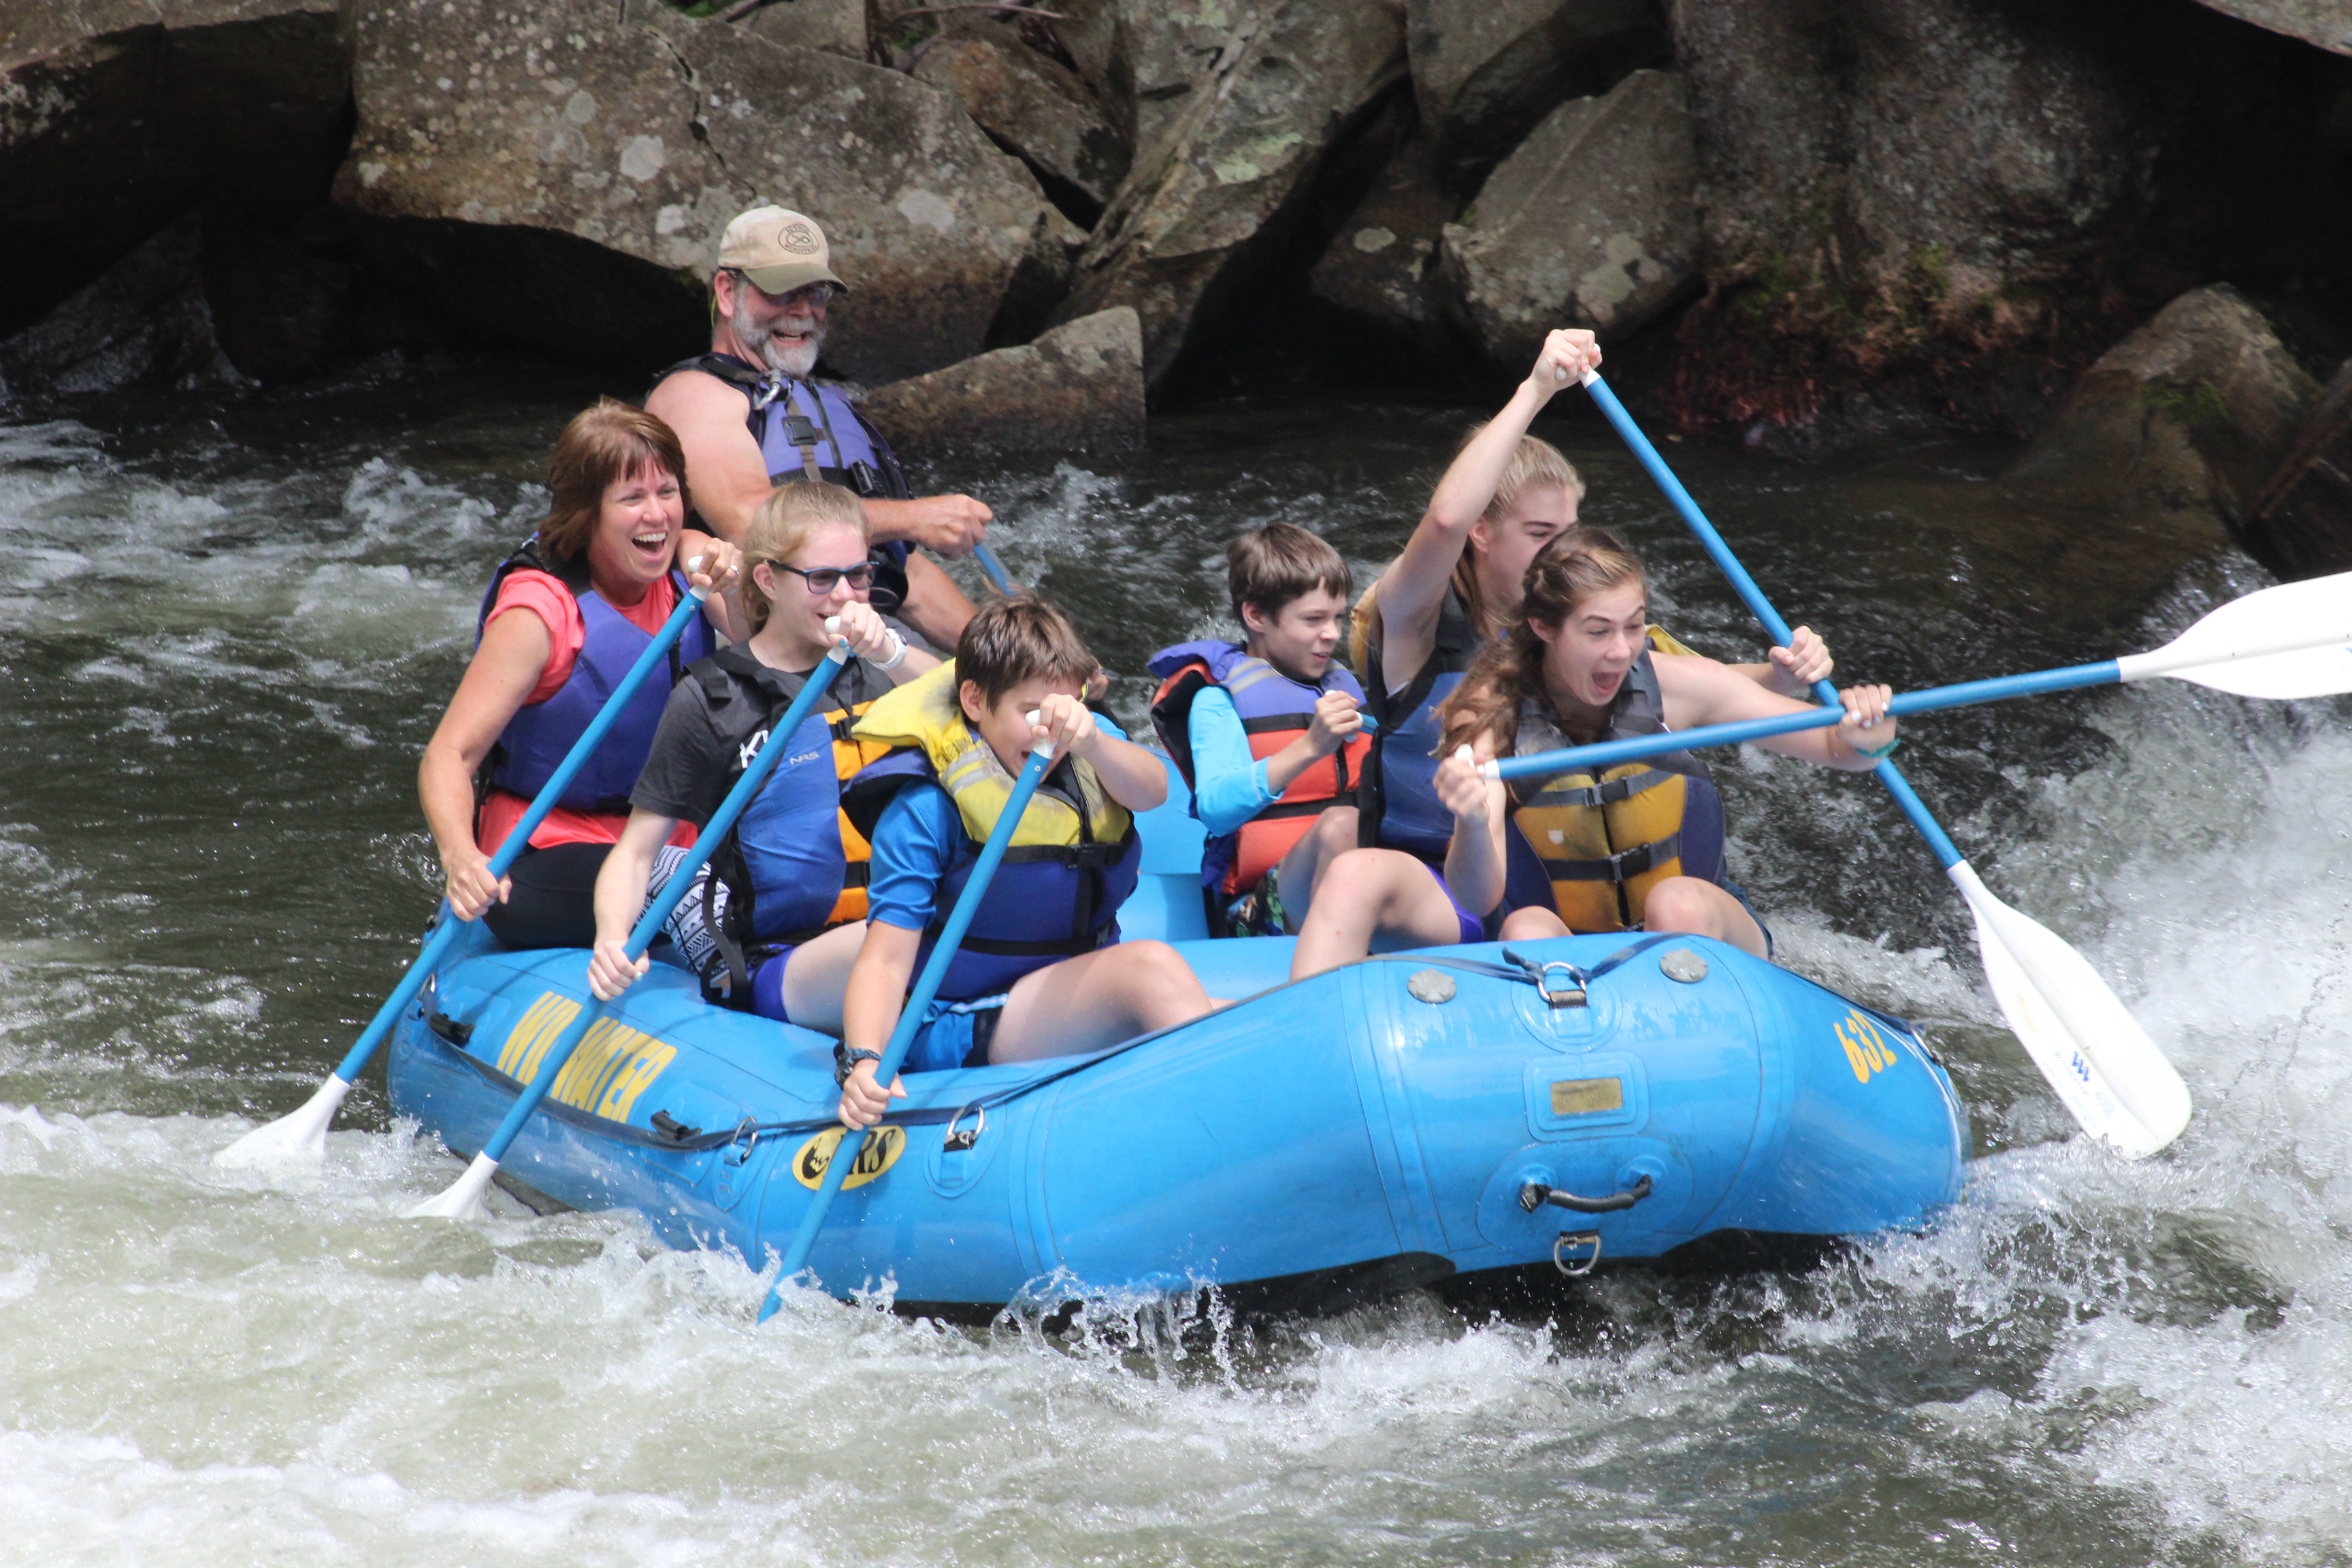 The Dingles having fun whitewater rafting